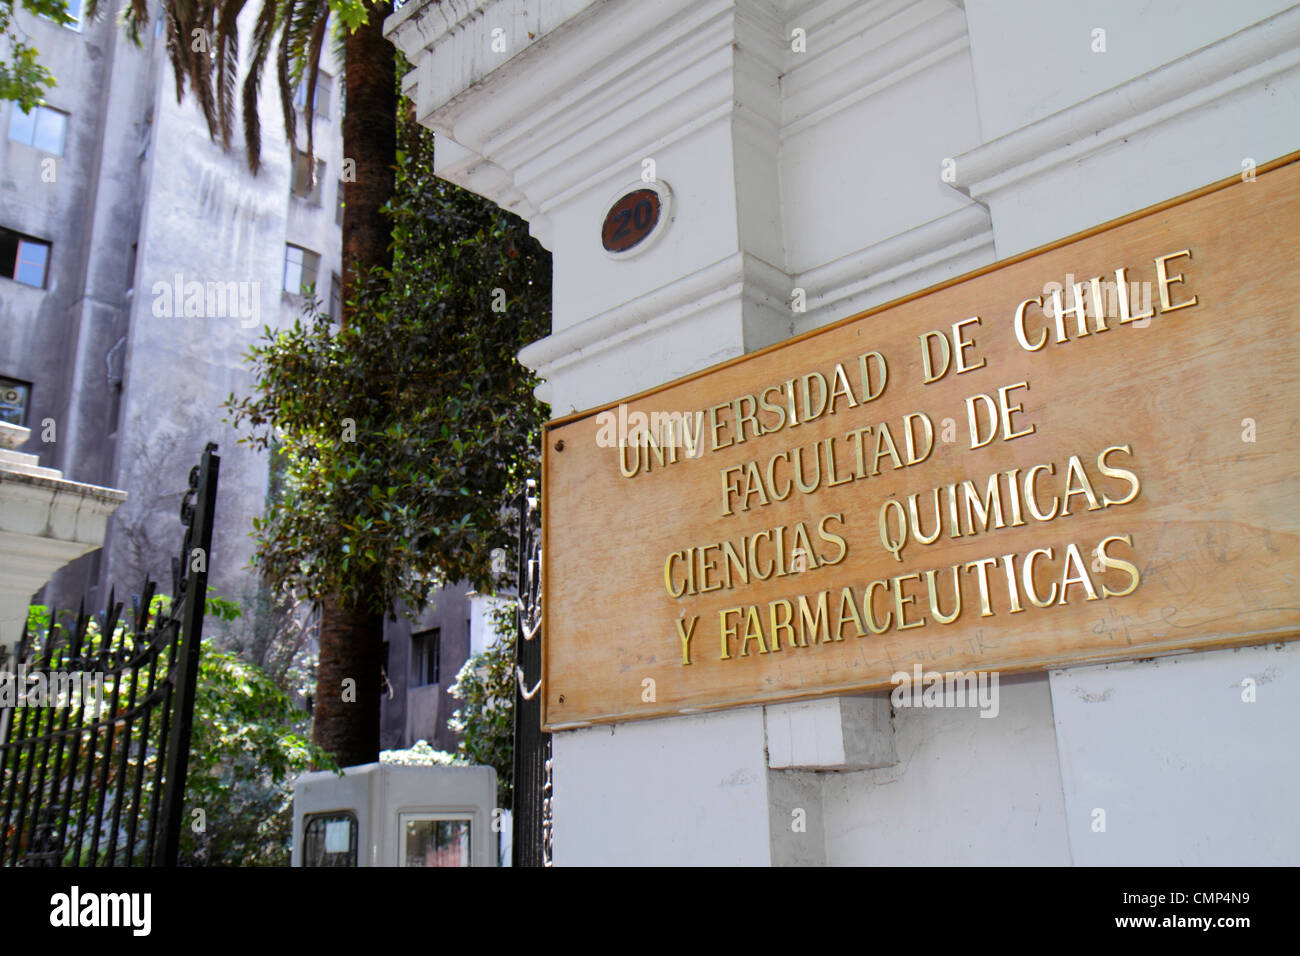 Santiago Chile,Providencia,Avenida Vicuna Mackenna,University of Chile,Science Faculty,Chemistry,Pharmacology,entrance,plaque,sign,higher education,pu Stock Photo